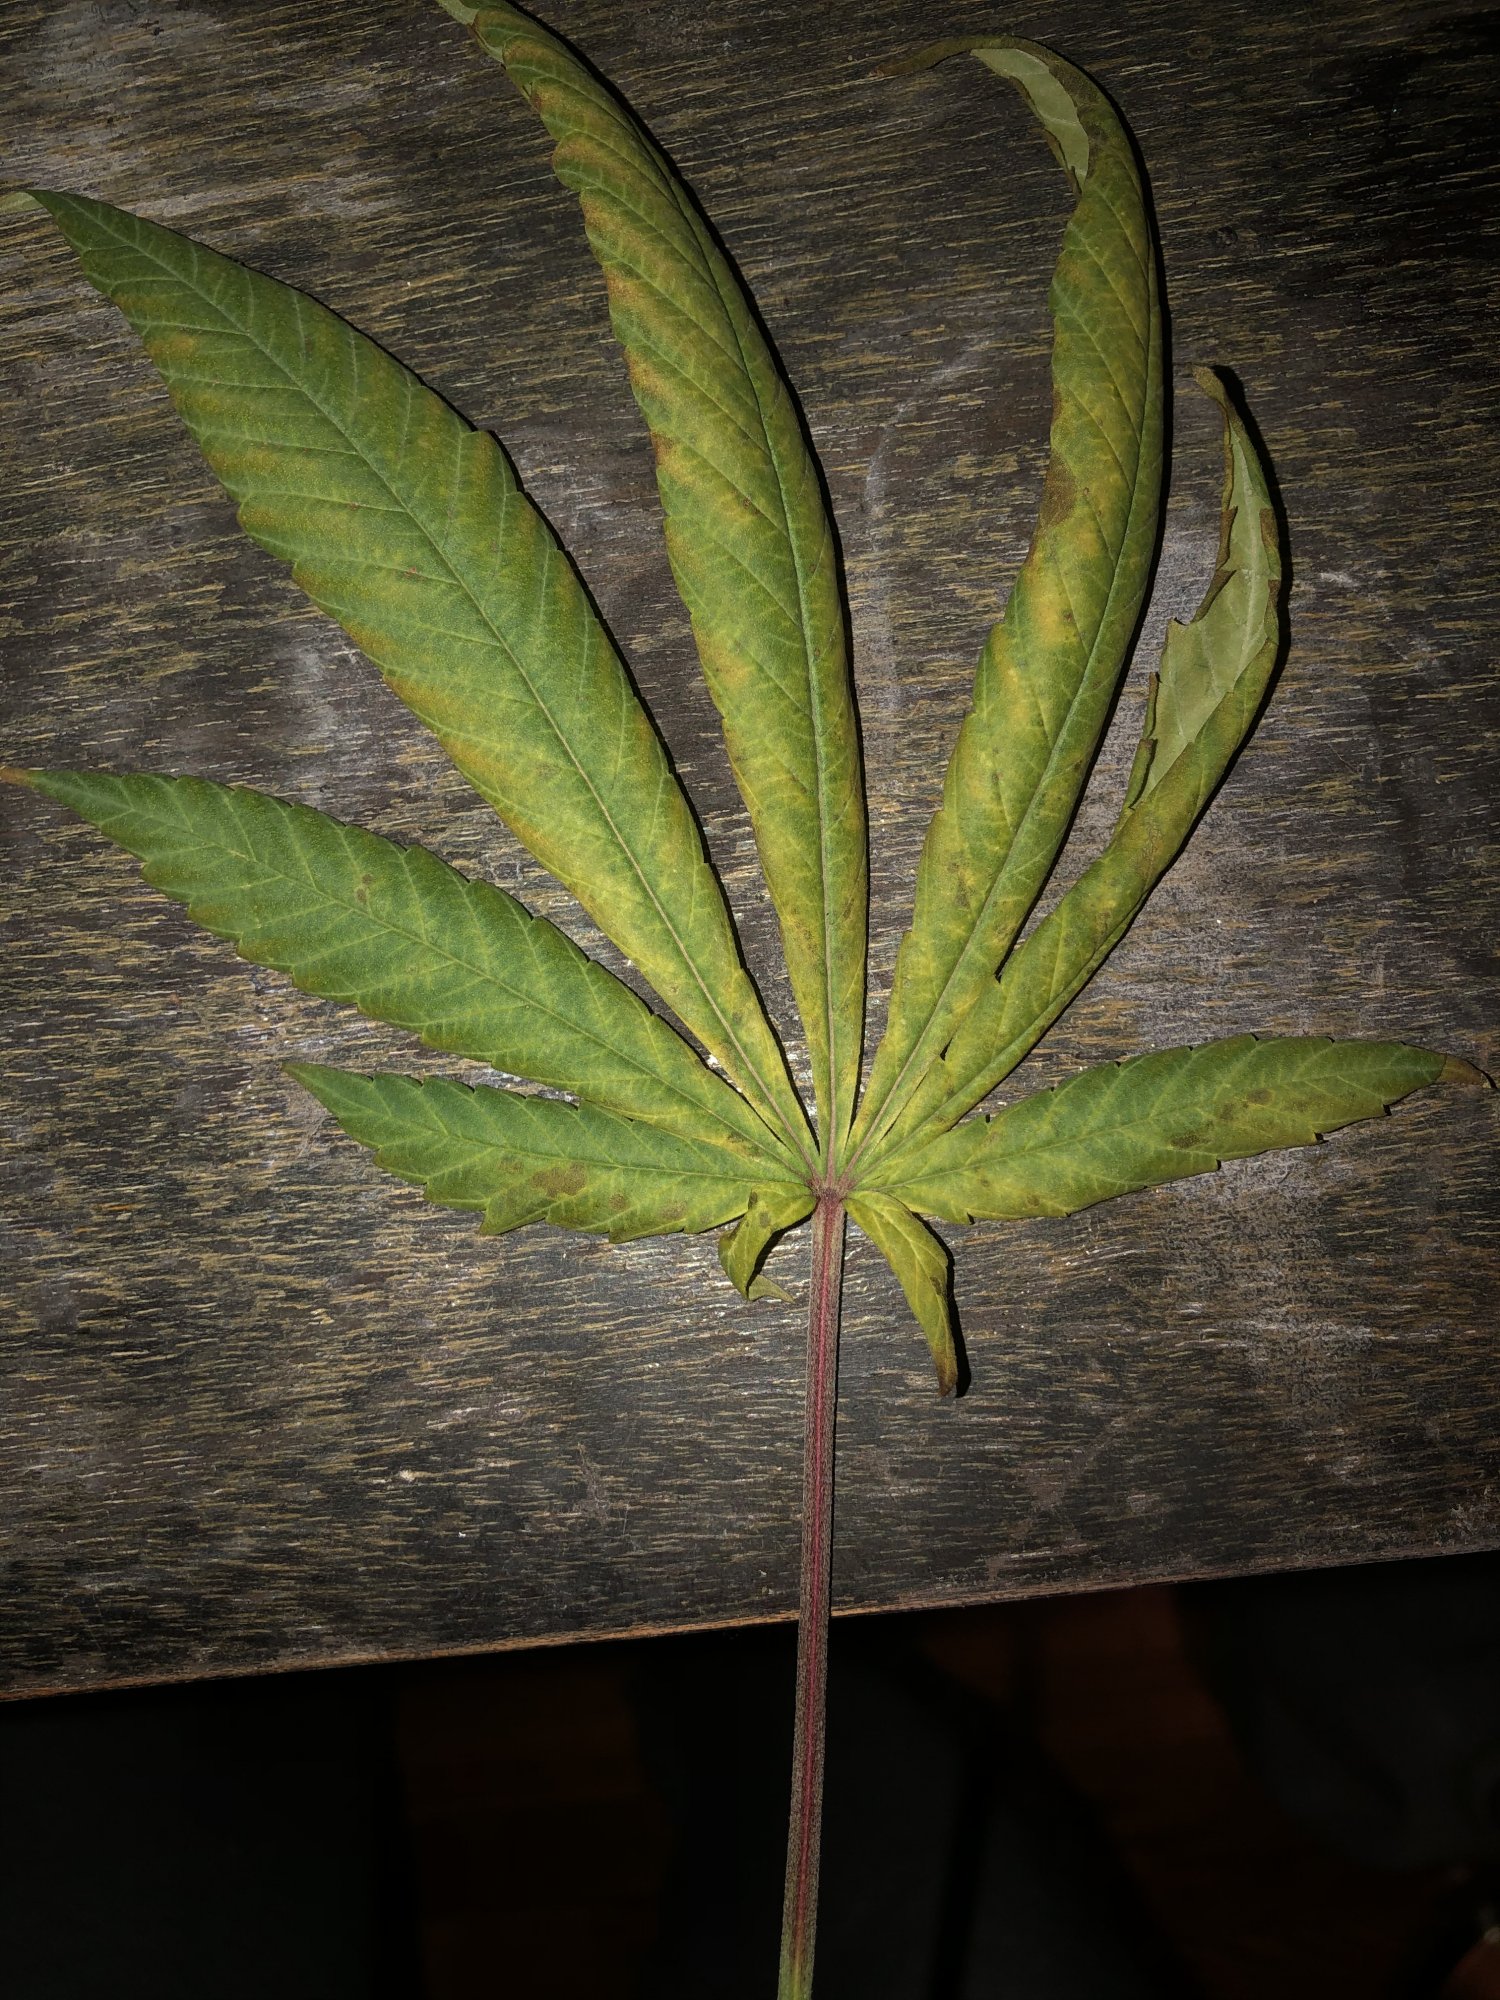 Can anyone tell me whats wrong with this leaf